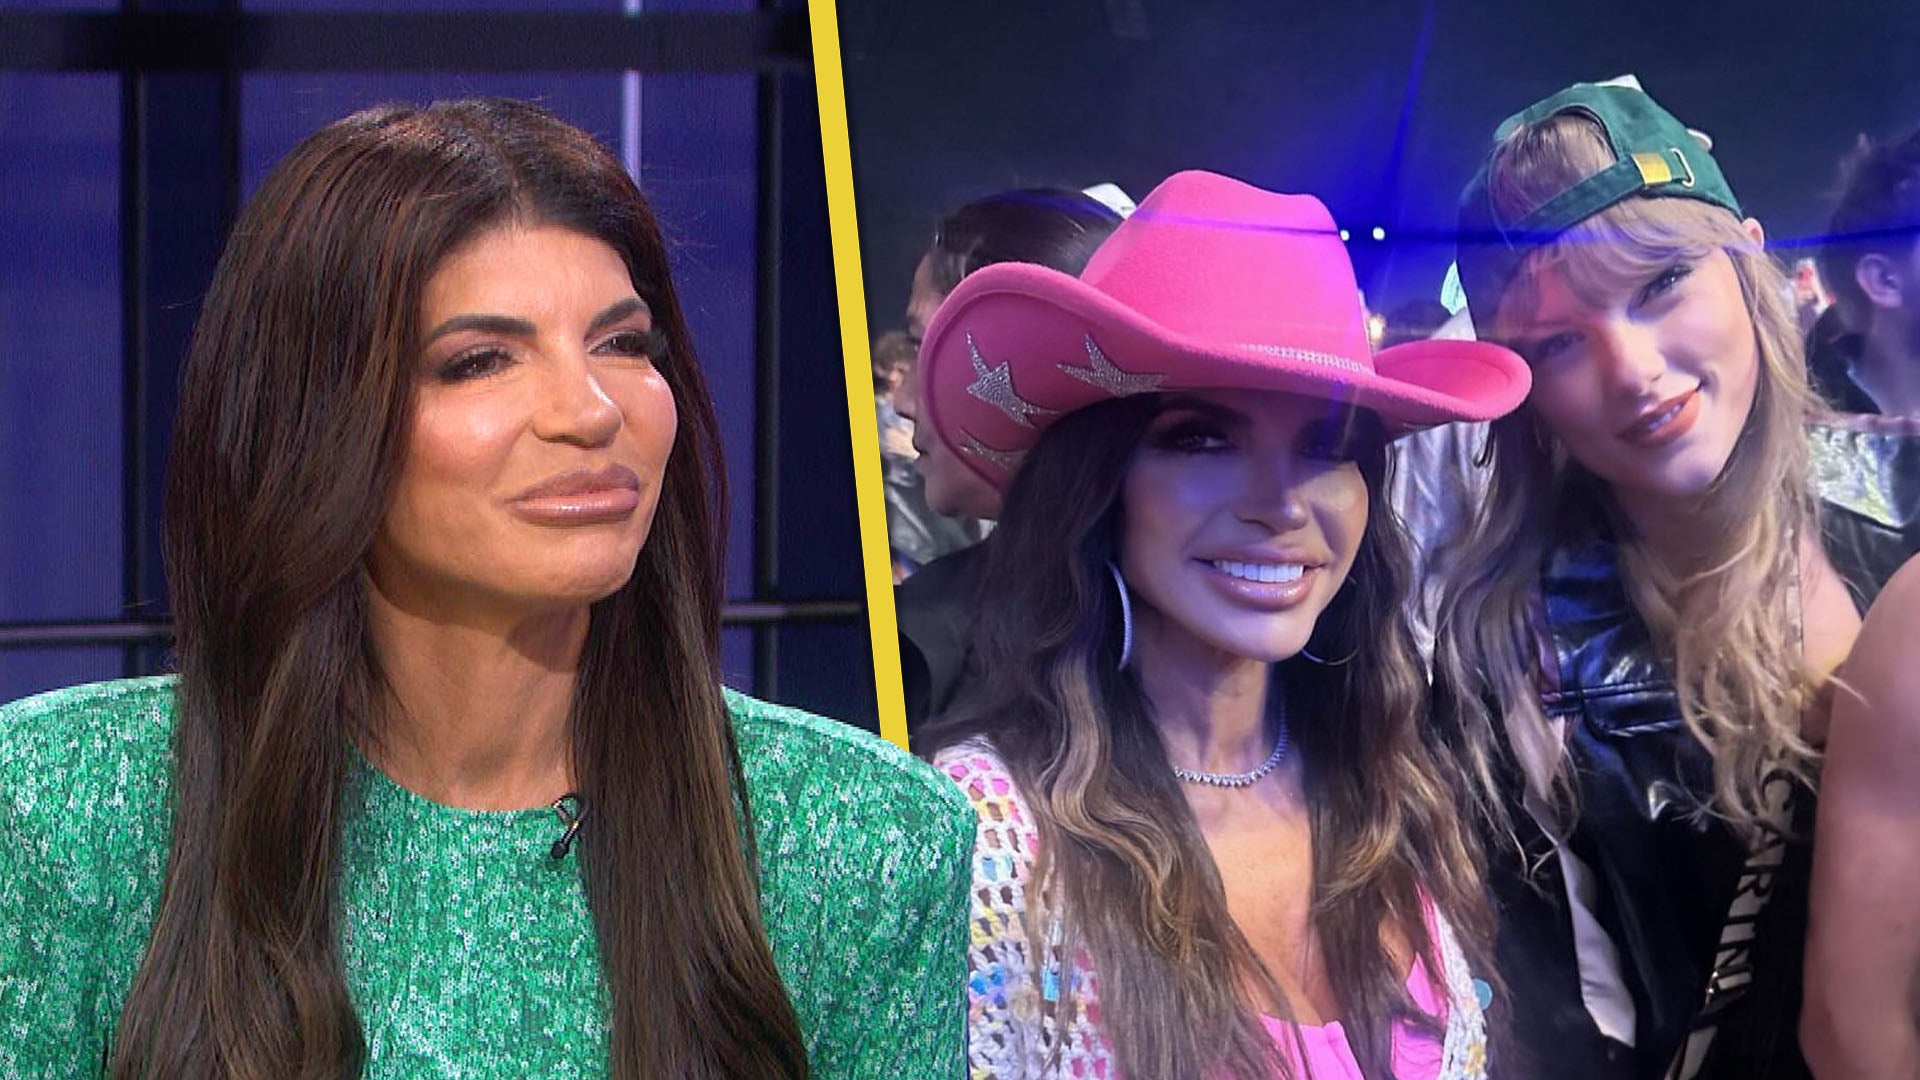 How Teresa Giudice Feels About Being Labeled a 'Villain' and Her Taylor Swift Moment at Coachella